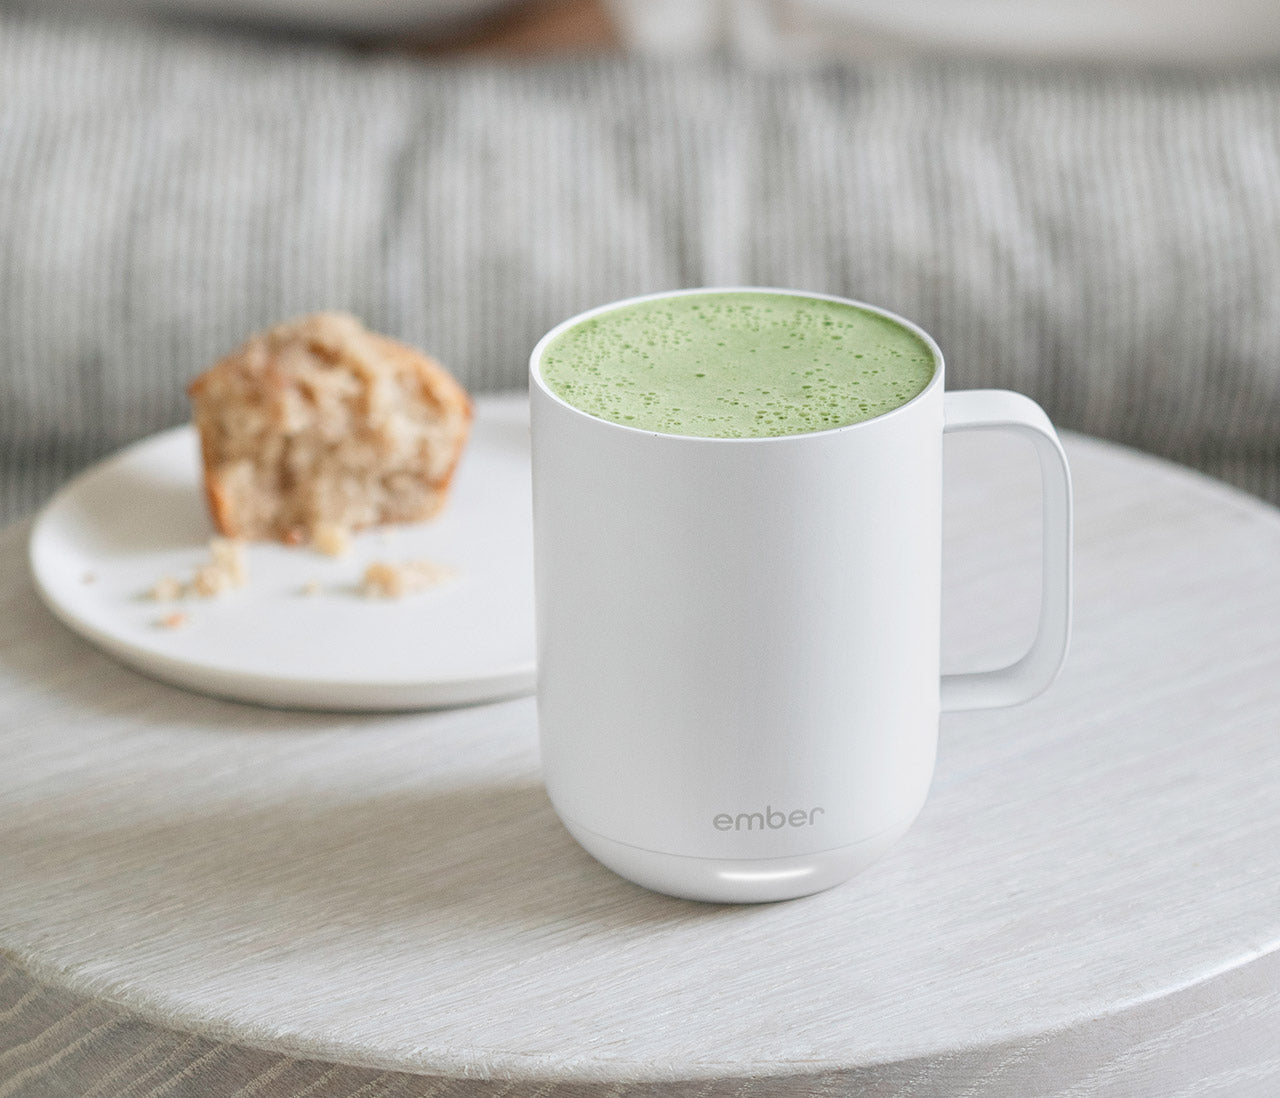 A frothy matcha latte sitting next to a crumbly muffin.